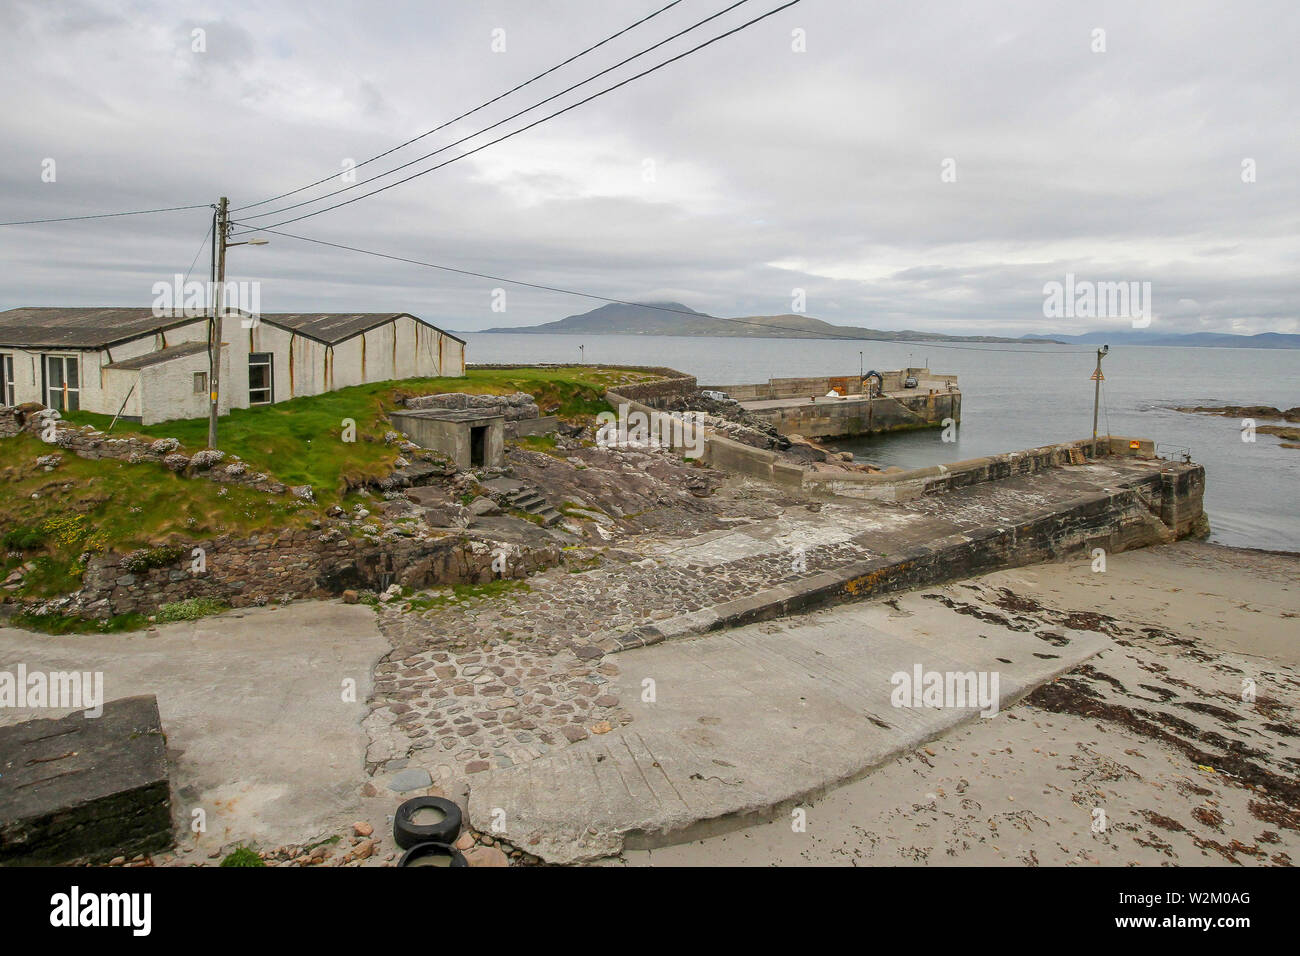 Harbour and quays at low tide in Ireland. Roonagh Quay near Louisburgh County Mayo provides the mainland base for the Clare Island ferry service. Stock Photo